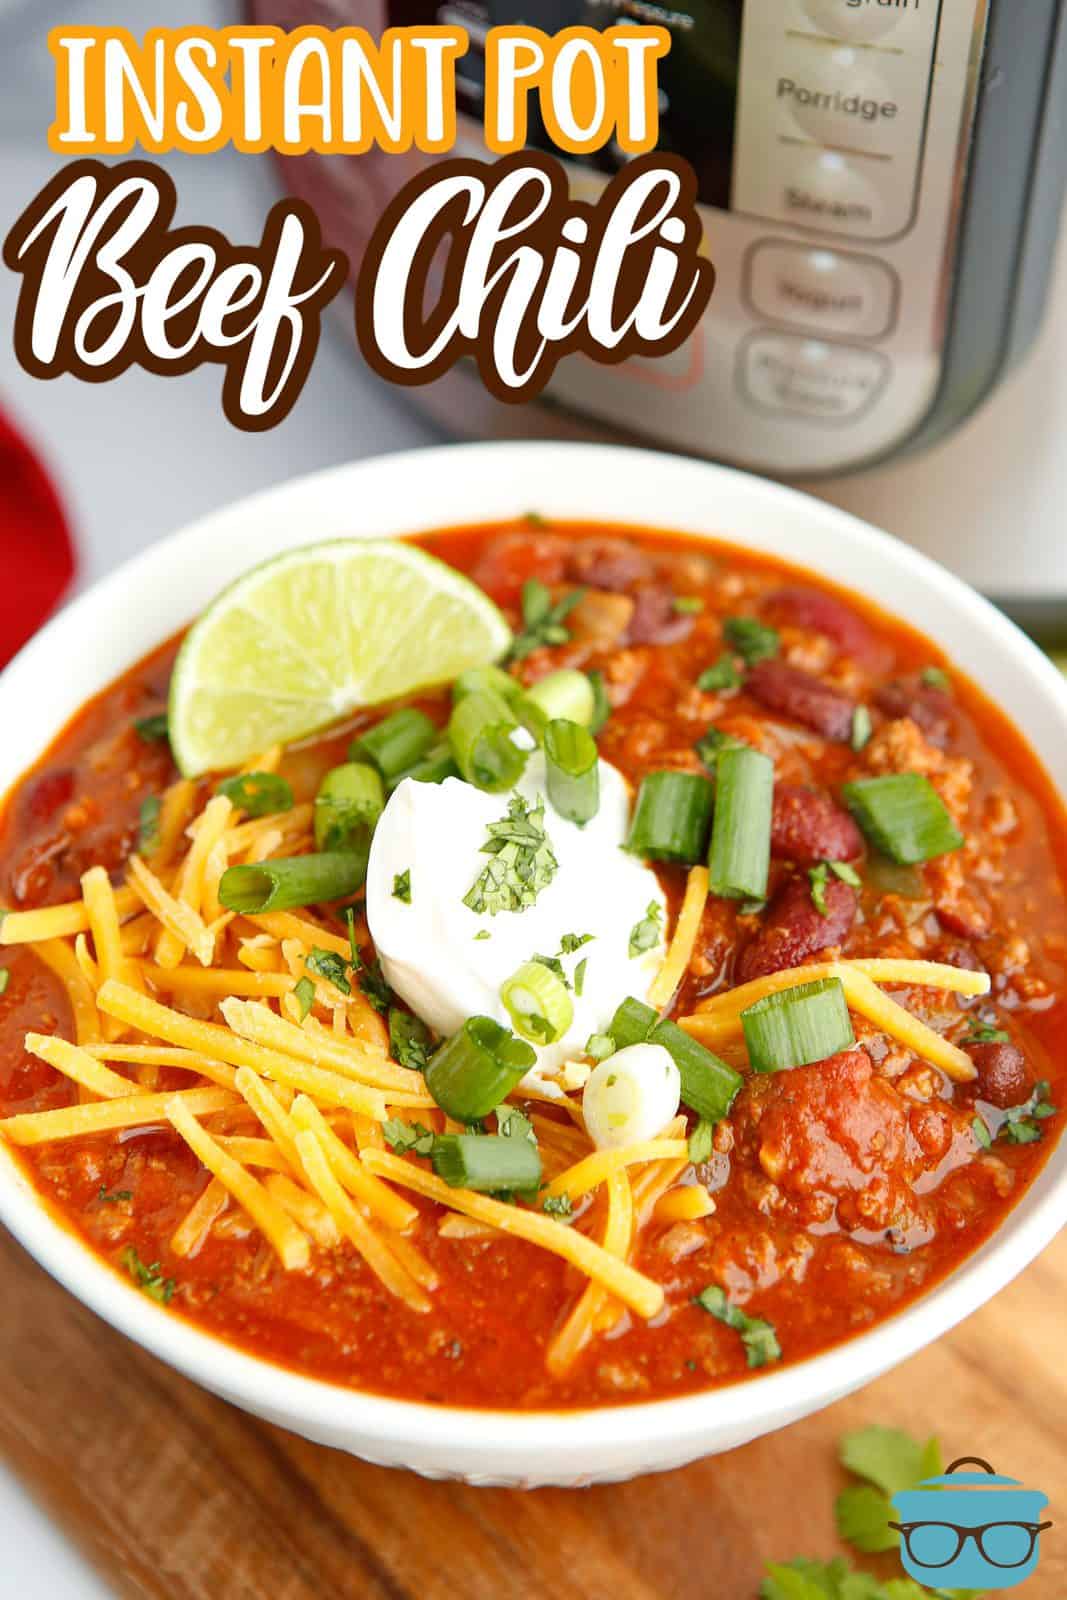 White bowl filled with Instant Pot Chili garnished Pinterest image.